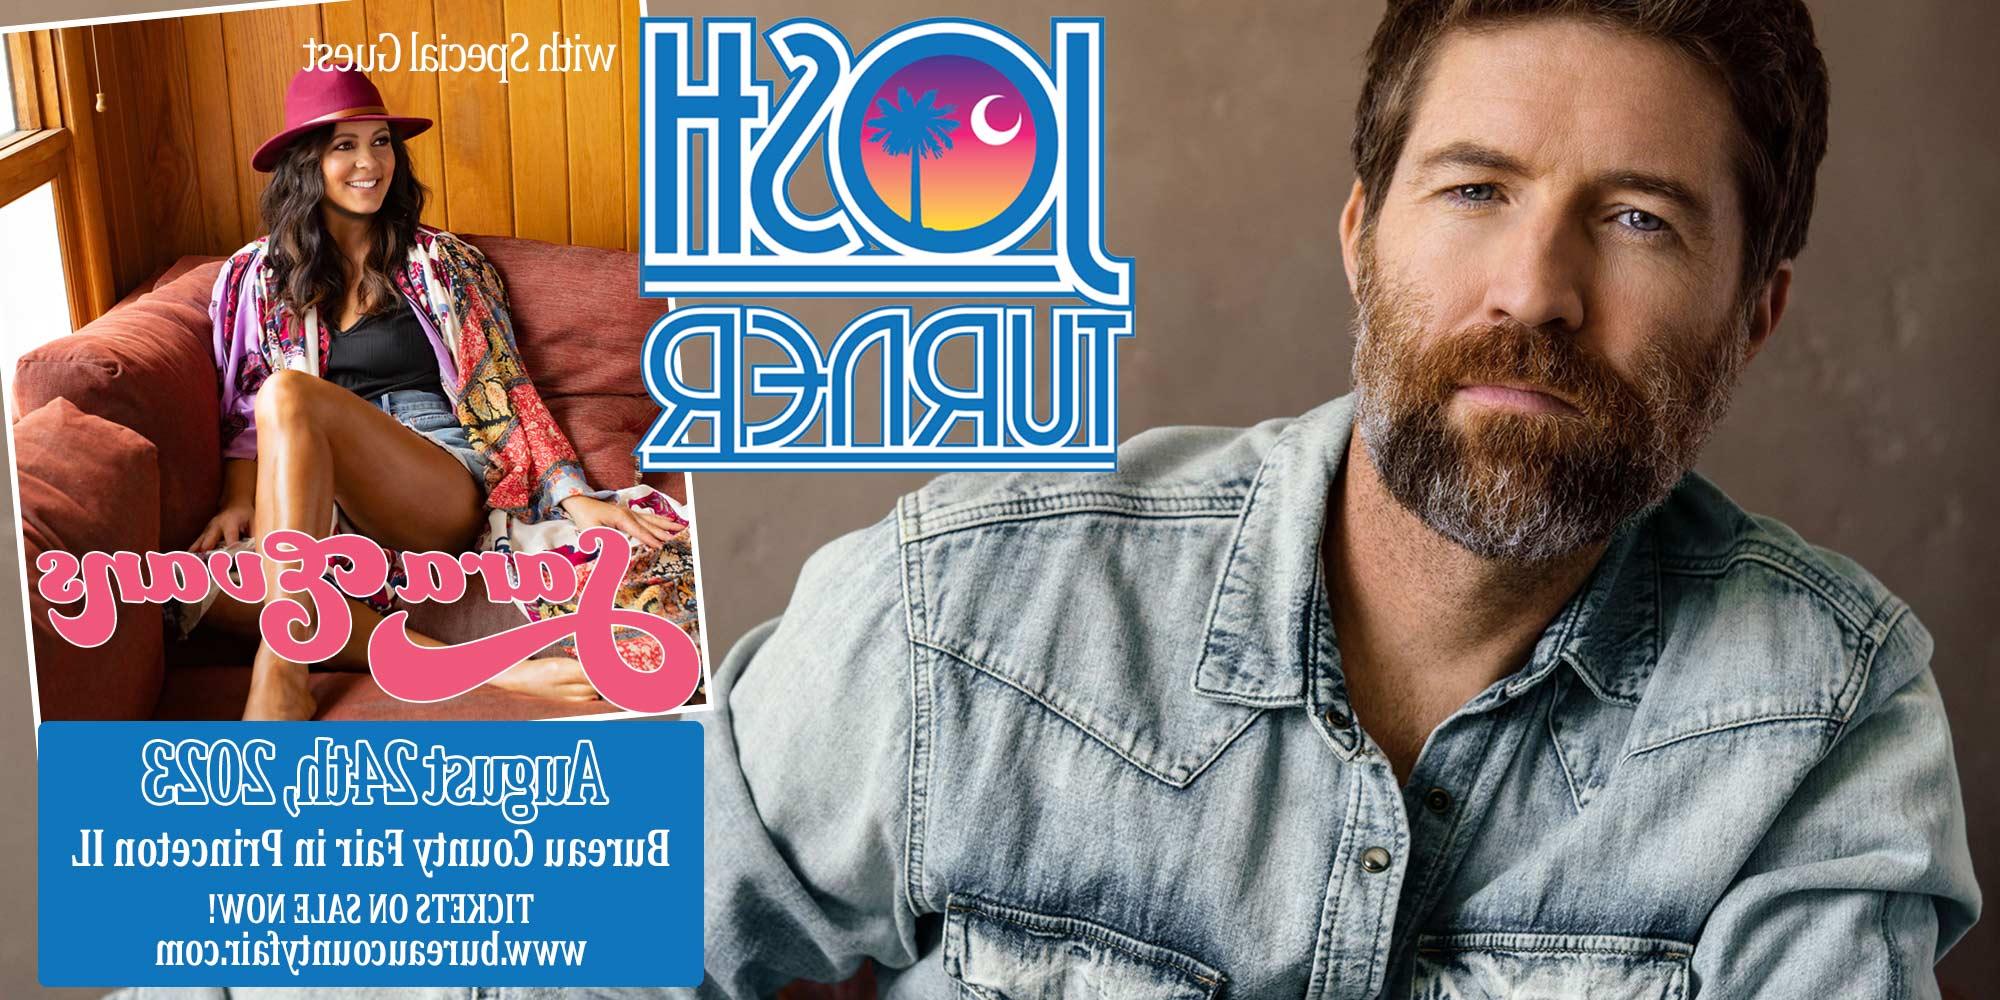 The Bureau County Fair Proudly Presents Josh Turner with Special Guest Sara Evans in Concert Thursday, August 24rd, 2023!